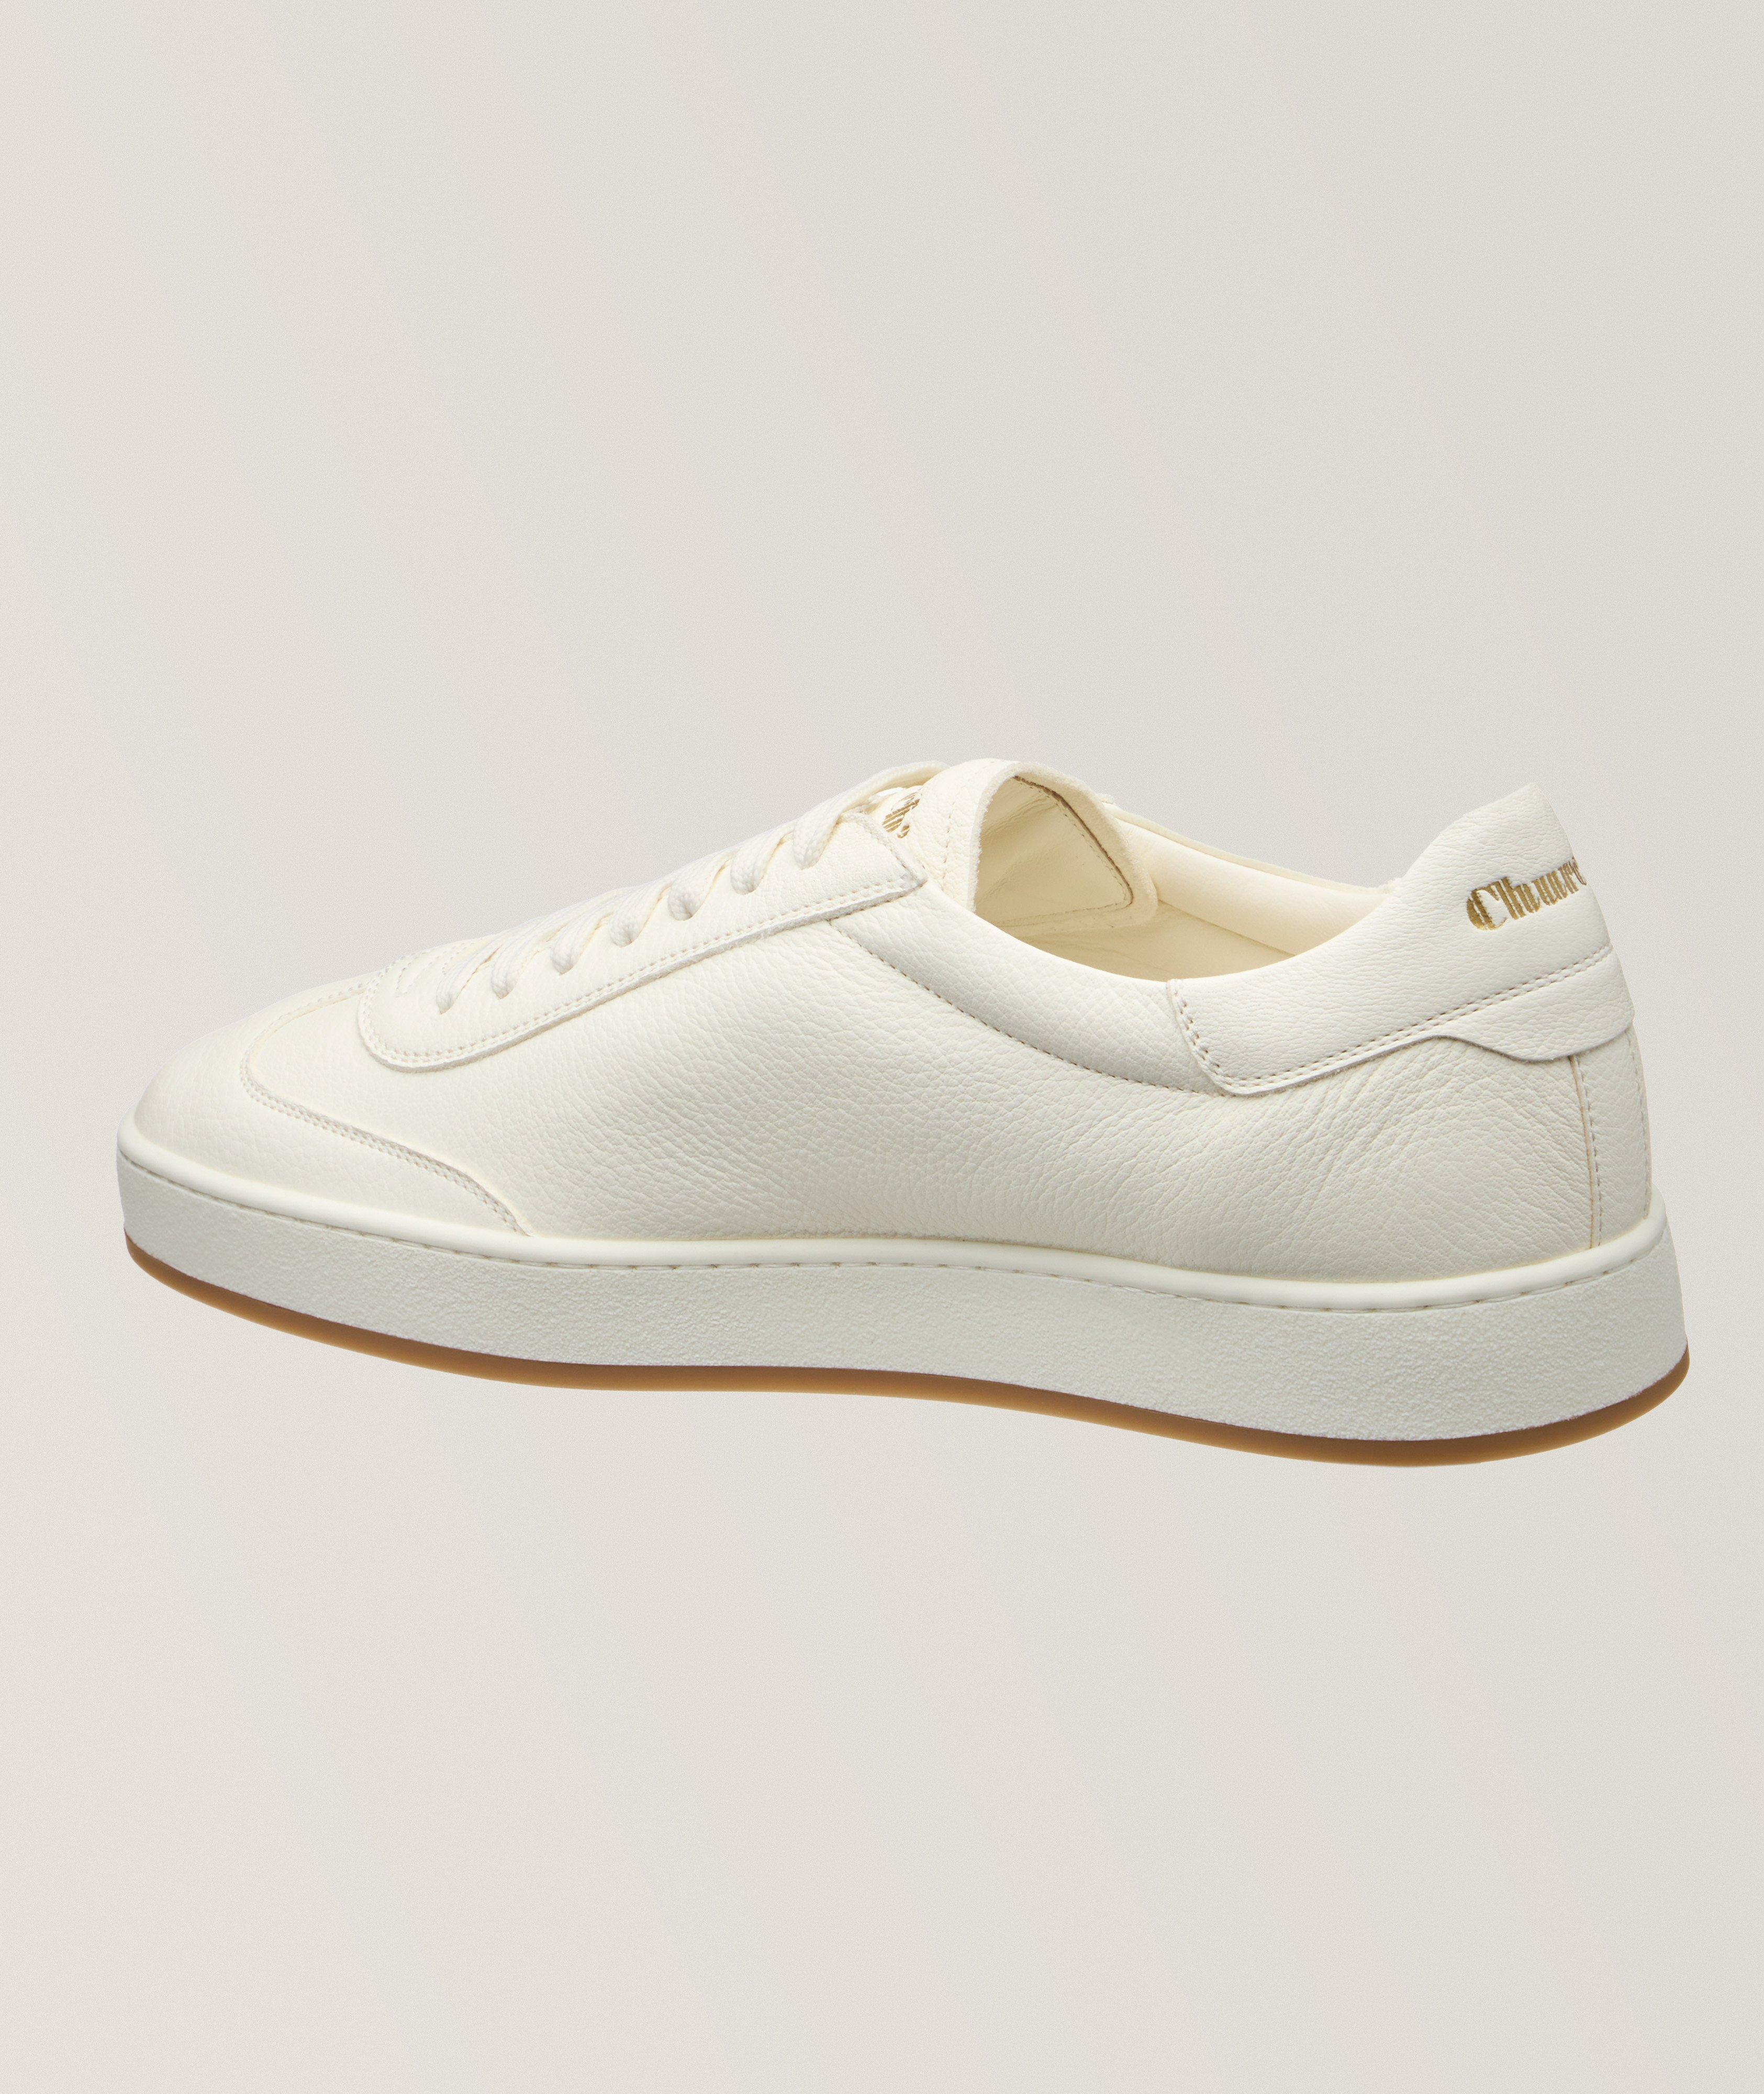 Largs 2 Leather Sneakers